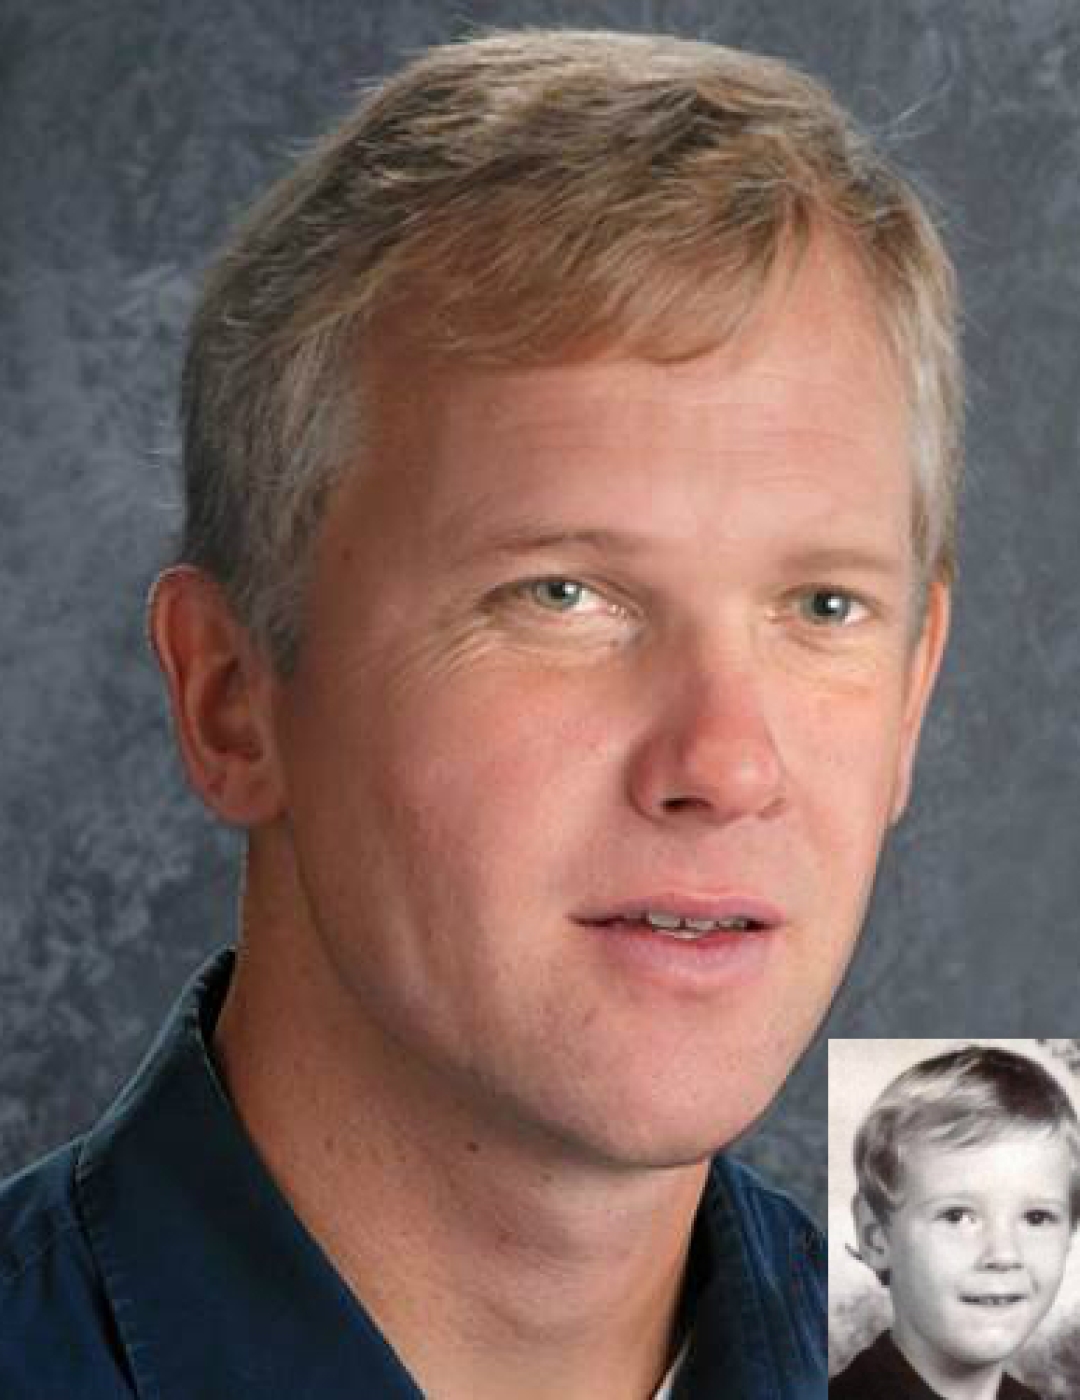 Jeremy Grice. Missing child with short blonde hair and hazel eyes. Age progressed photo shows what Jeremy looks like at 34 years old: adult man with short gray hair, hazel eyes, and smile lines around eyes.